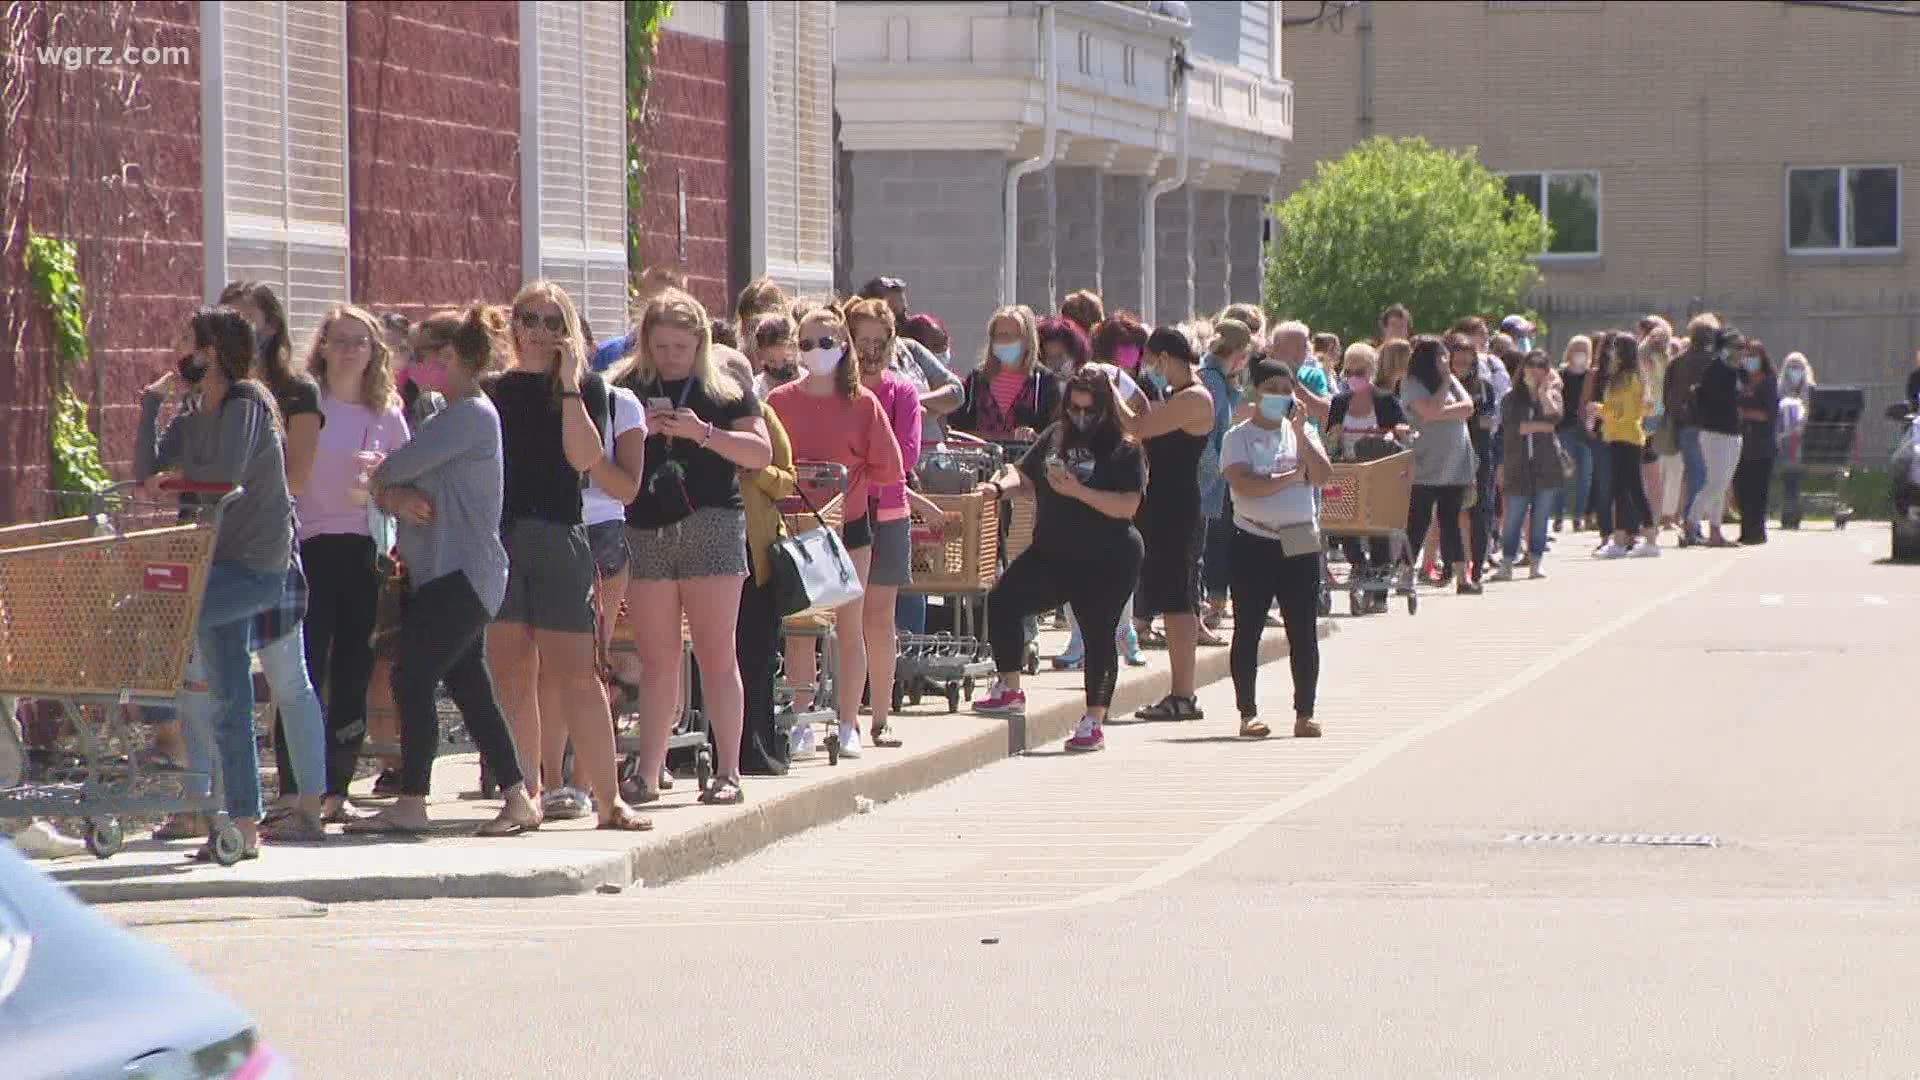 There were long lines outside of TJ Maxx in Amherst on Monday morning. The store opened for the first time since March due to the Coronavirus.